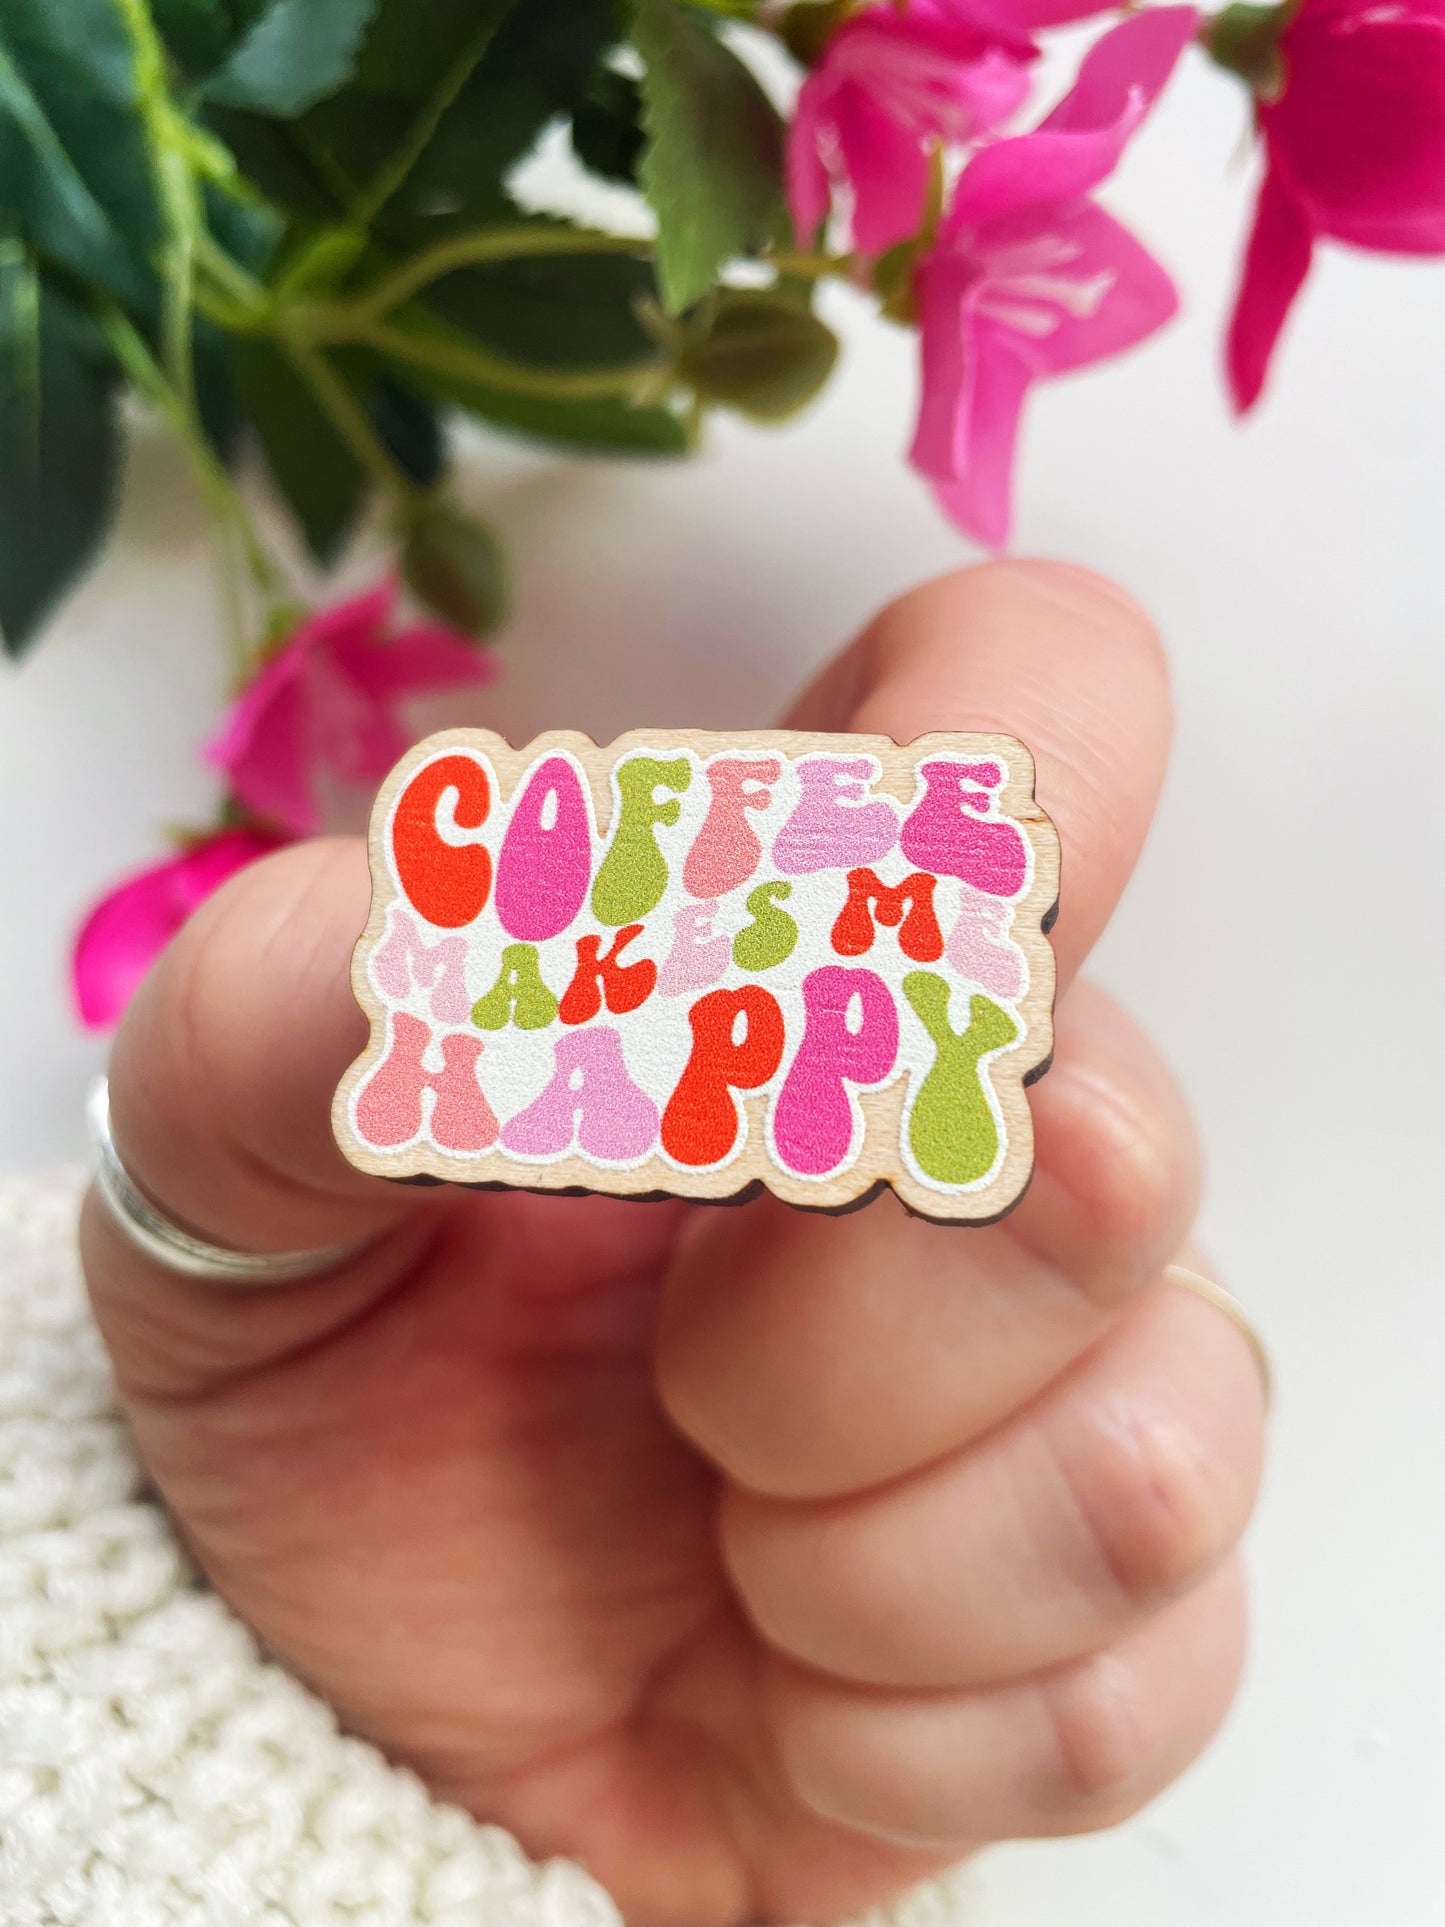 Coffee Makes Me Happy Wooden Pin Badge